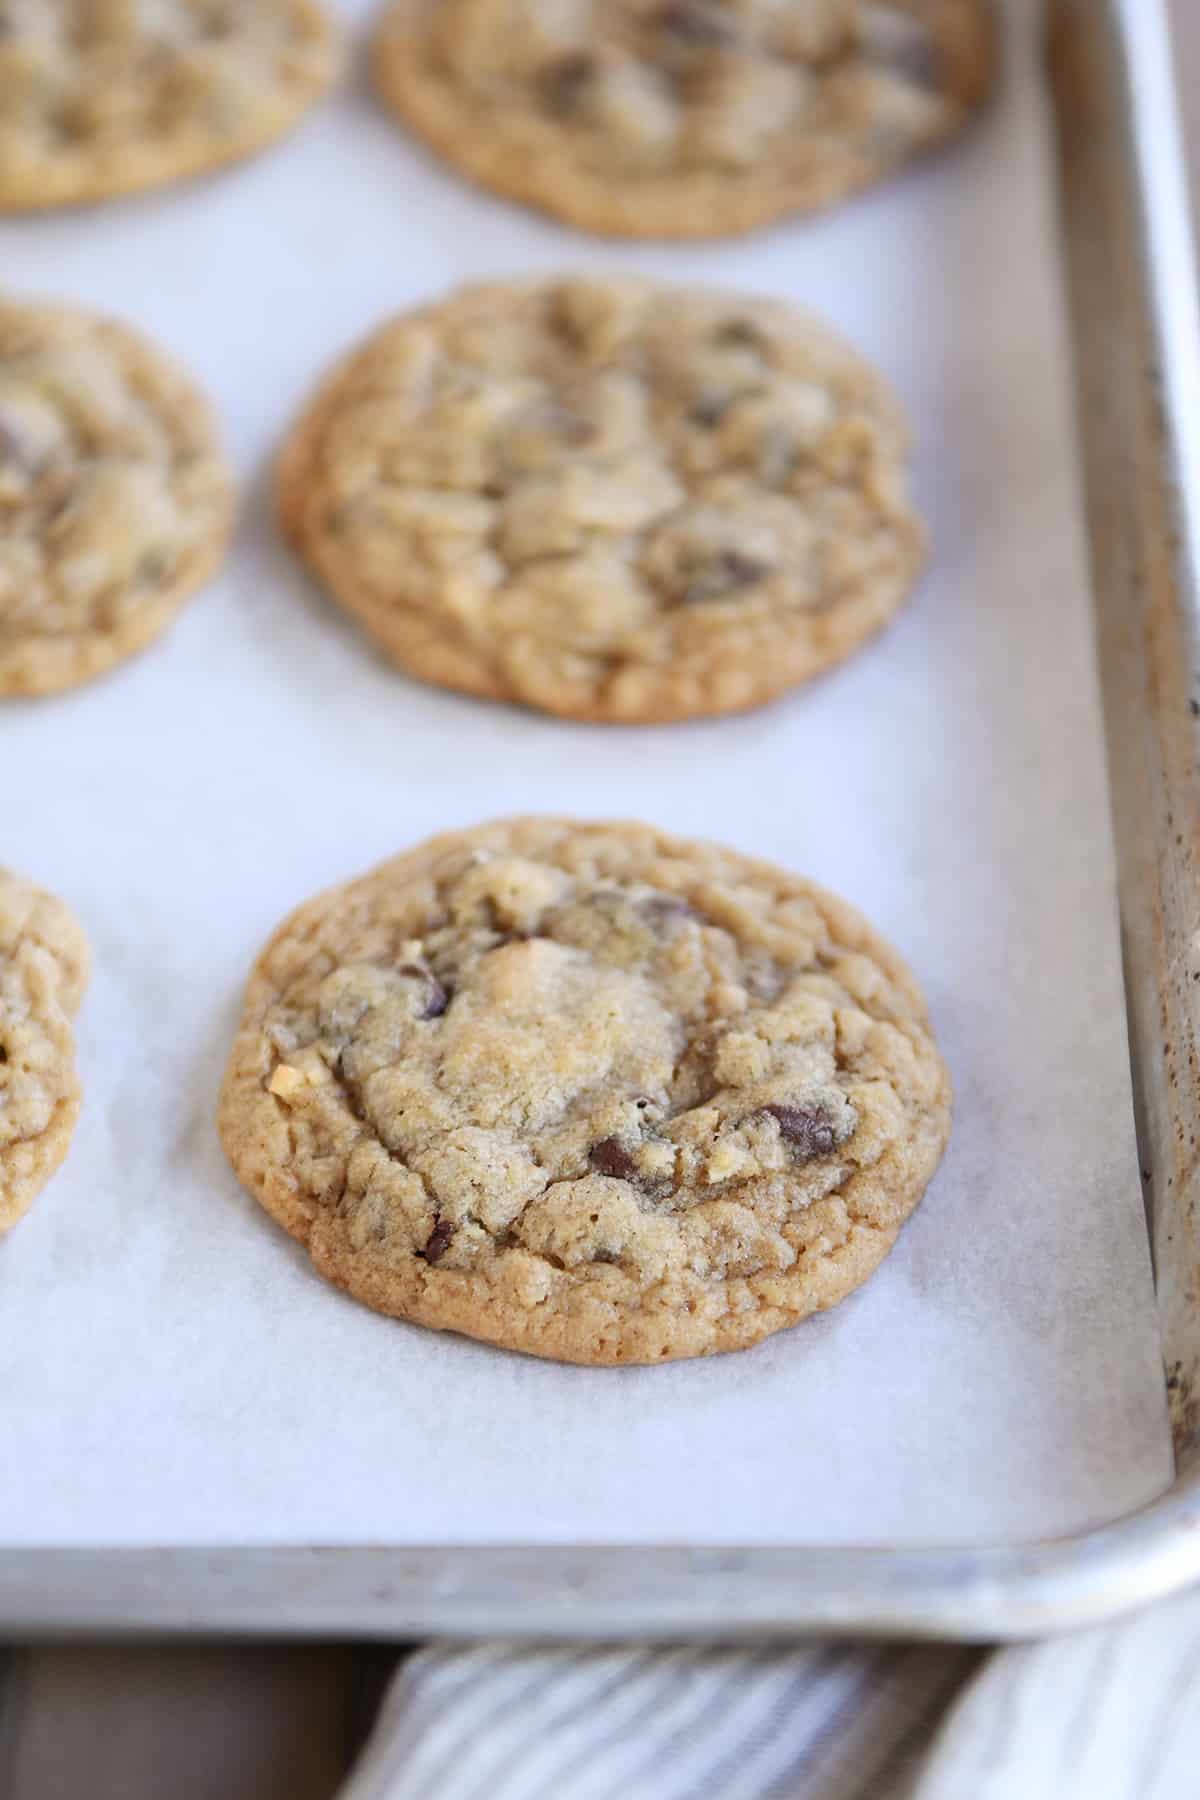 Soft and chewy oatmeal chocolate chip coconut cookies on sheet pan with parchment paper.